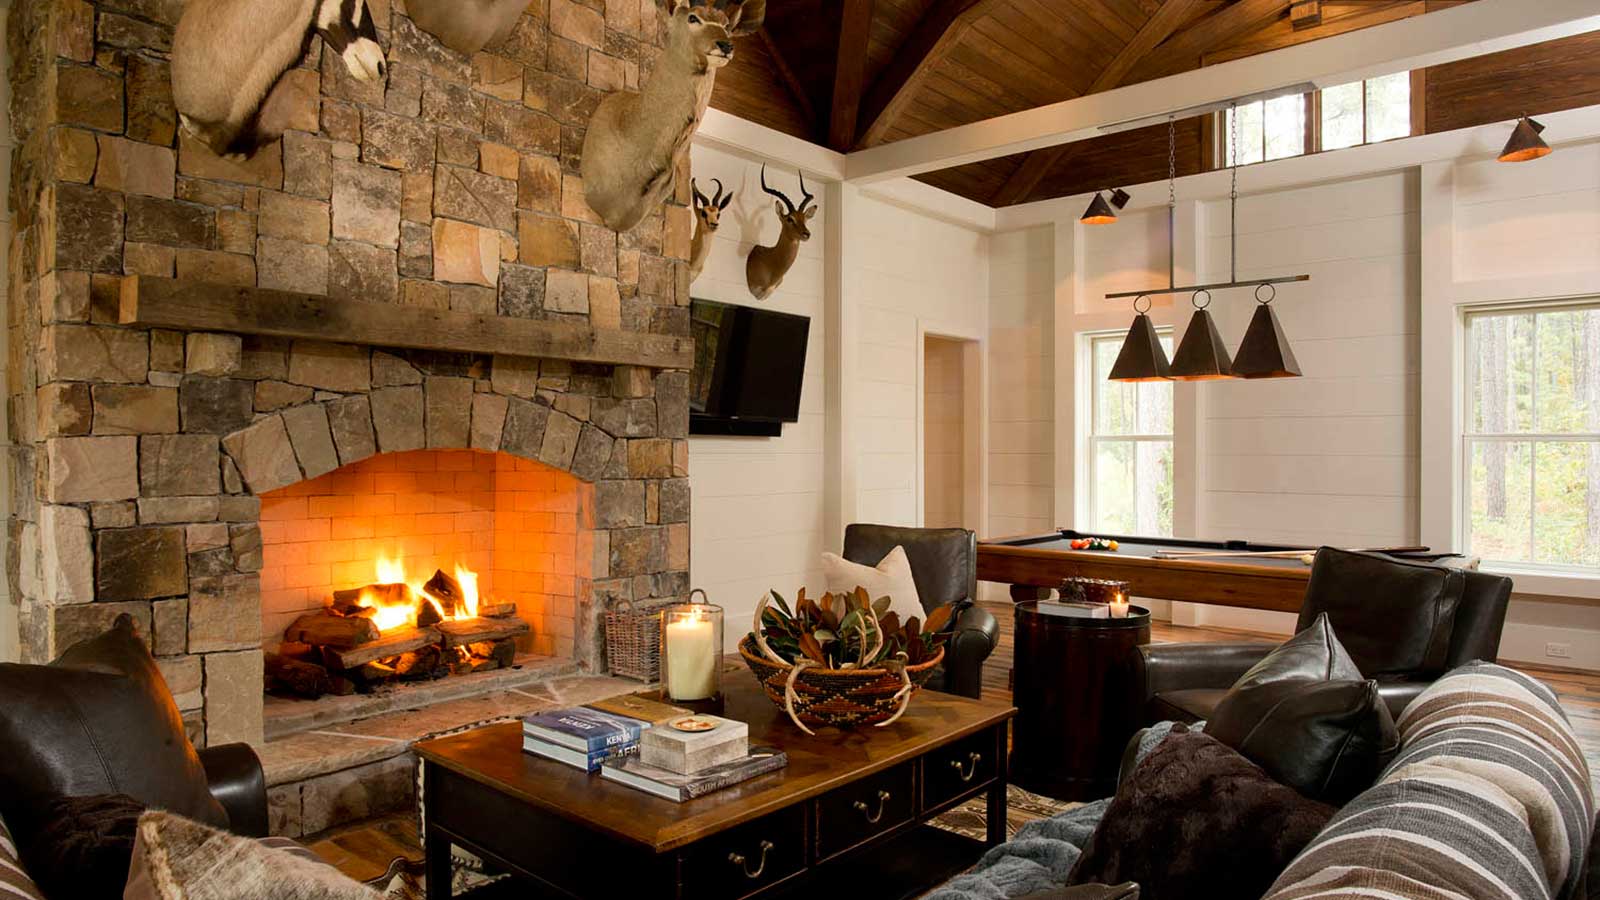 den fireplace designs by j banks design group create a cozy atmosphere that sacrifices nothing in style